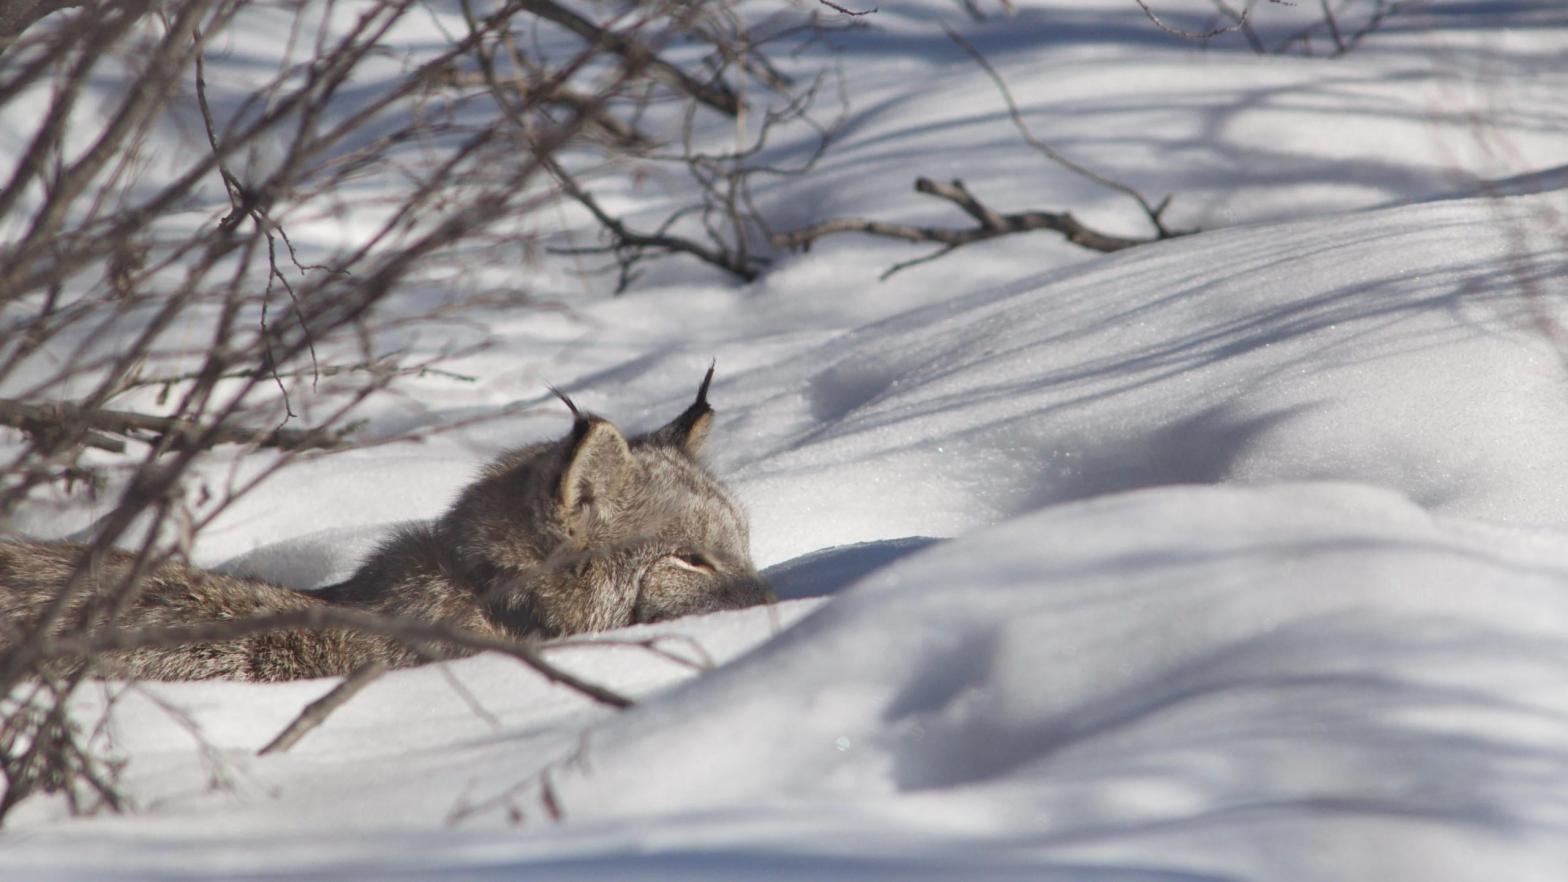 The predators can be hard to study in the wild. (Photo: Emily Studd)